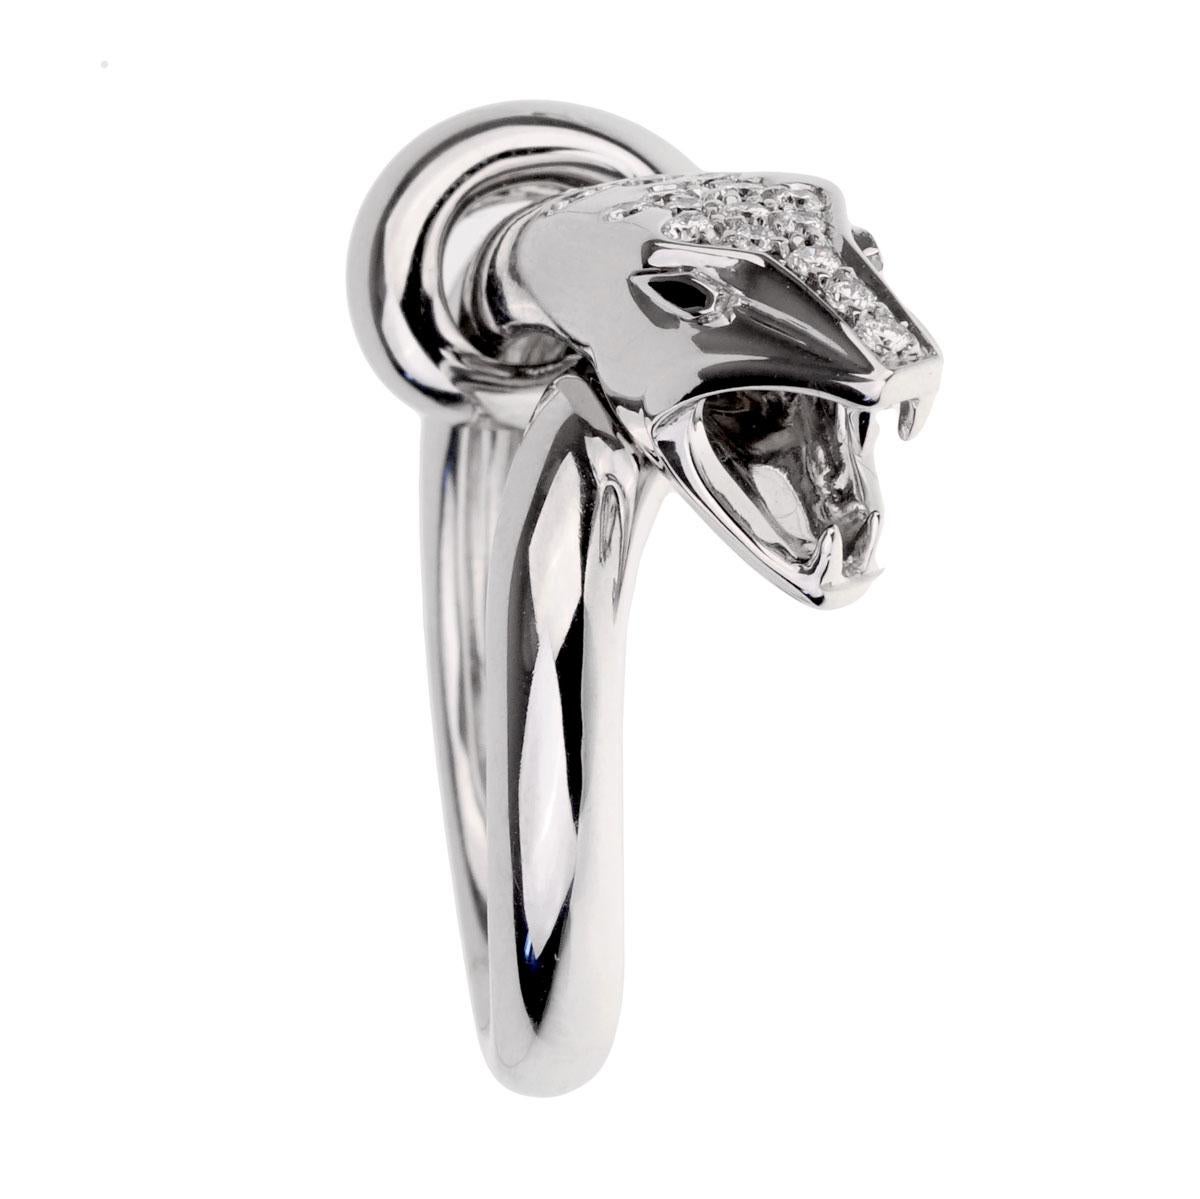 A fierce Boucheron snake ring adorned with round brilliant cut diamonds in shimmering 18k white gold.

Size 5 (Resizeable)